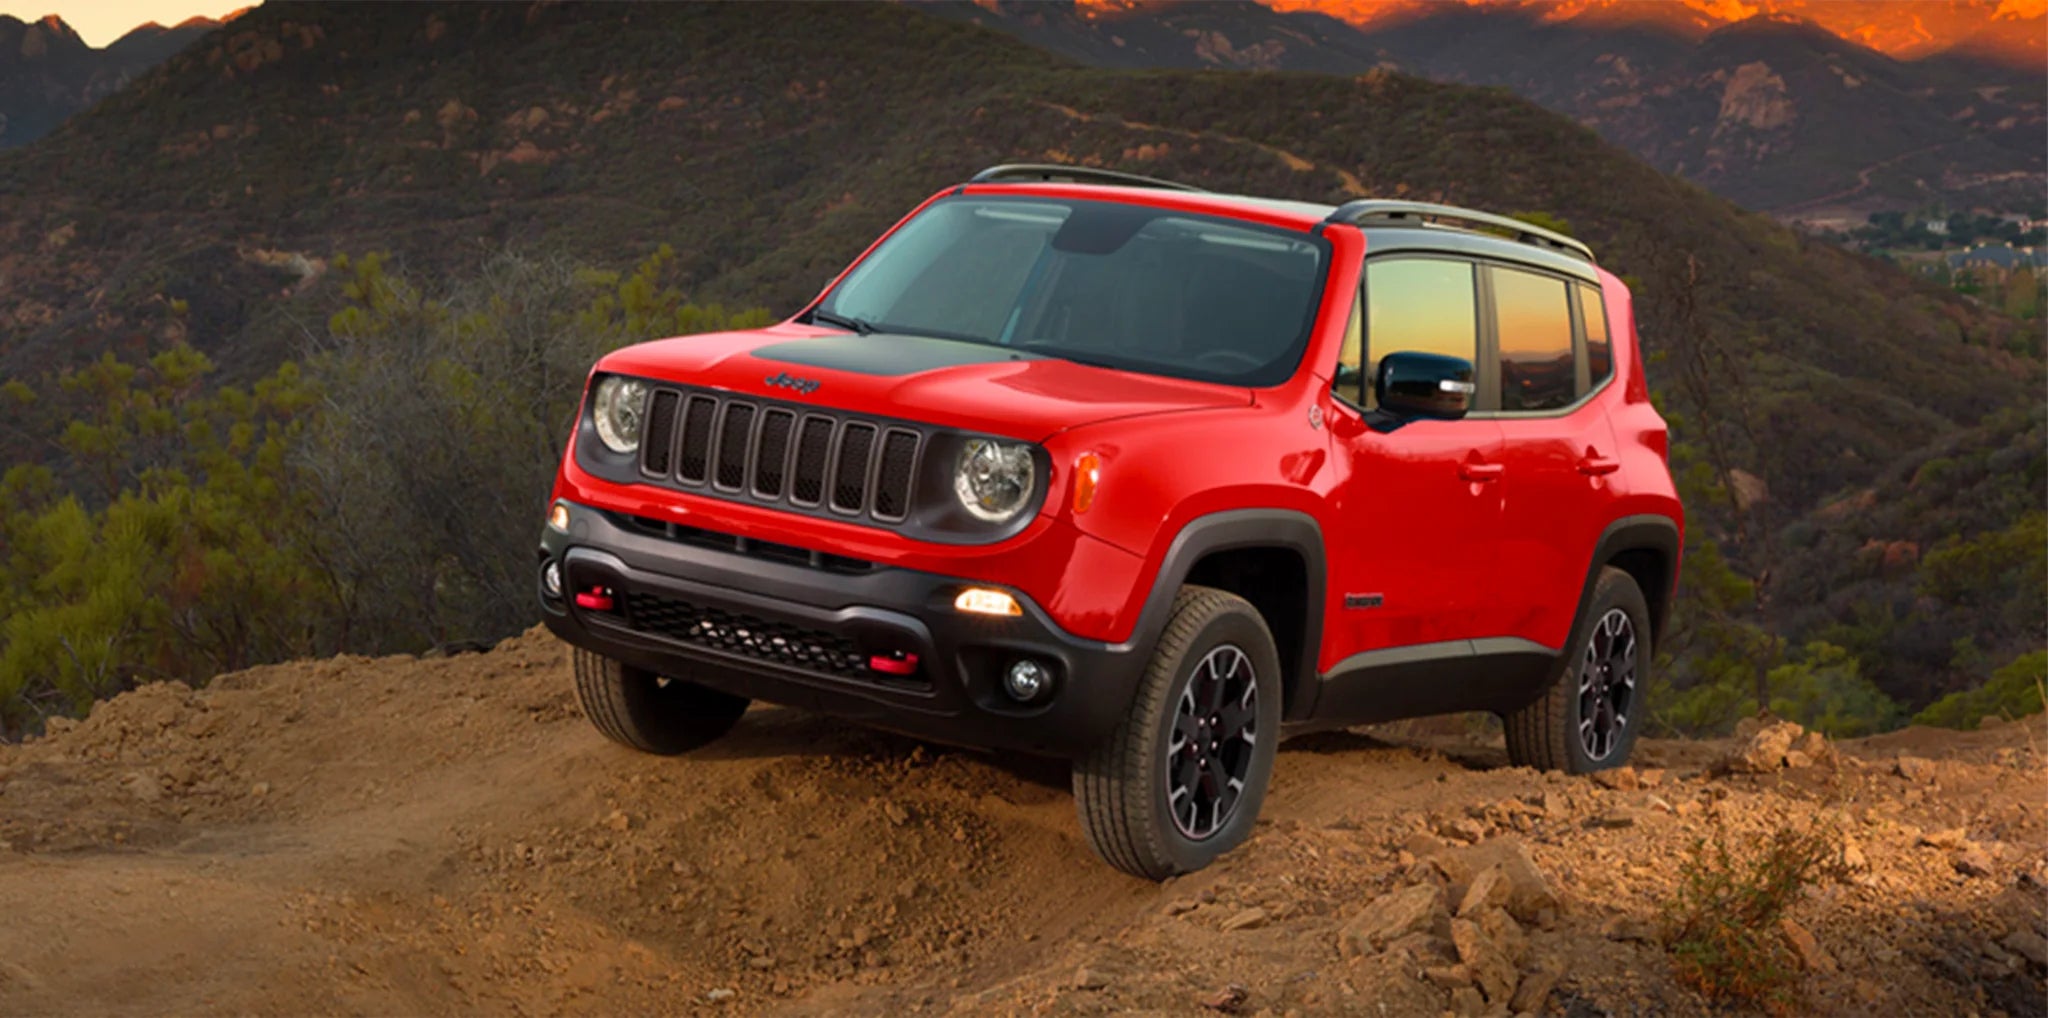 Jeep Renegade: First Subcompact Crossover